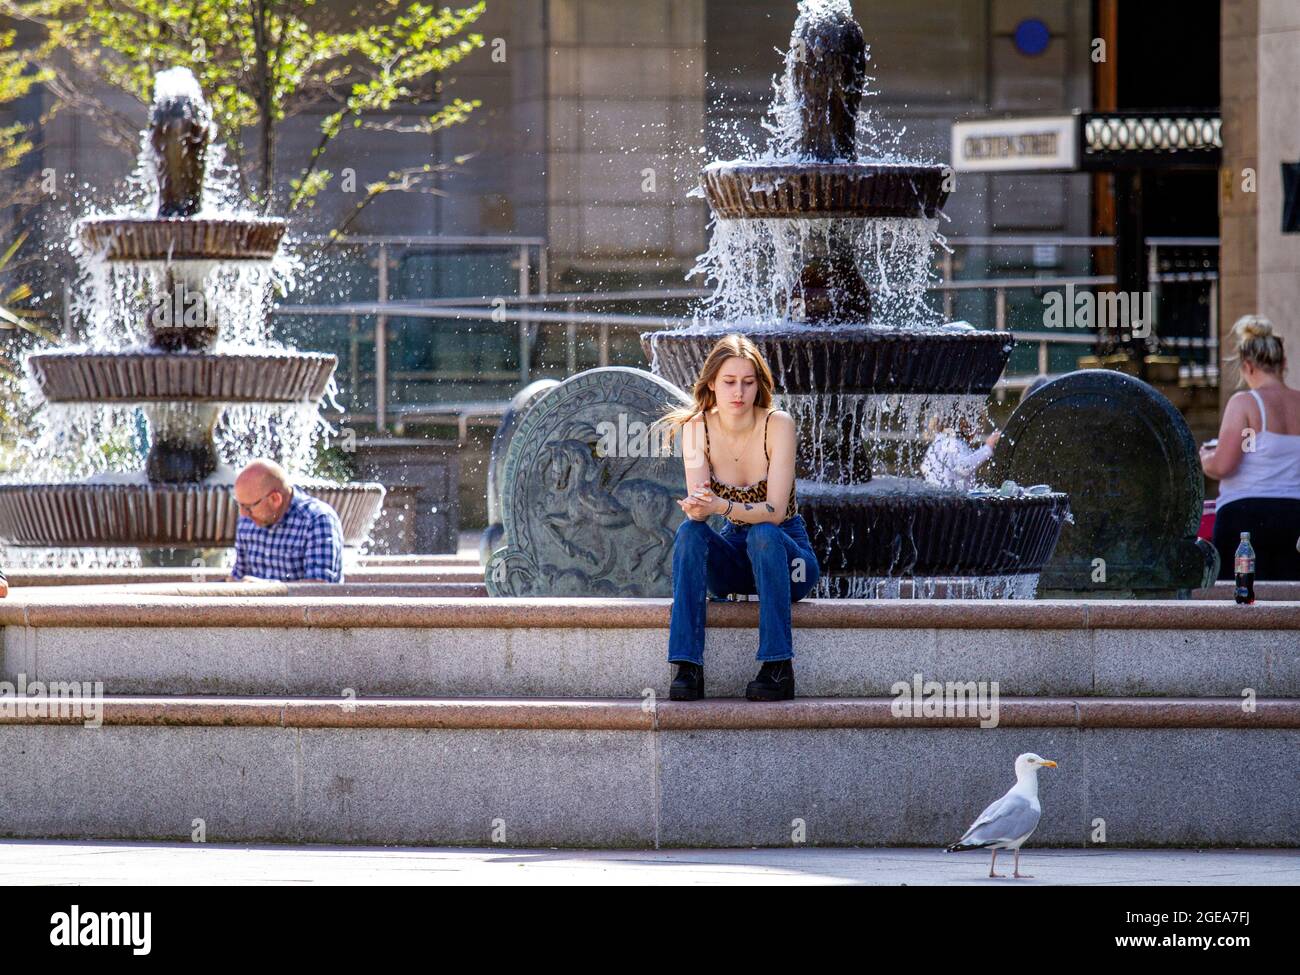 Dundee, Tayside, Scotland, UK. 18th Aug, 2021. UK Weather: Late Summer heatwave sweeping across North East Scotland with temperatures reaching 24°C. A glamorous young woman Annette Clarke sitting in the shade cooling off from the glorious hot sunny weather at the Caird Hall fountains in Dundee city centre. Credit: Dundee Photographics/Alamy Live News Stock Photo